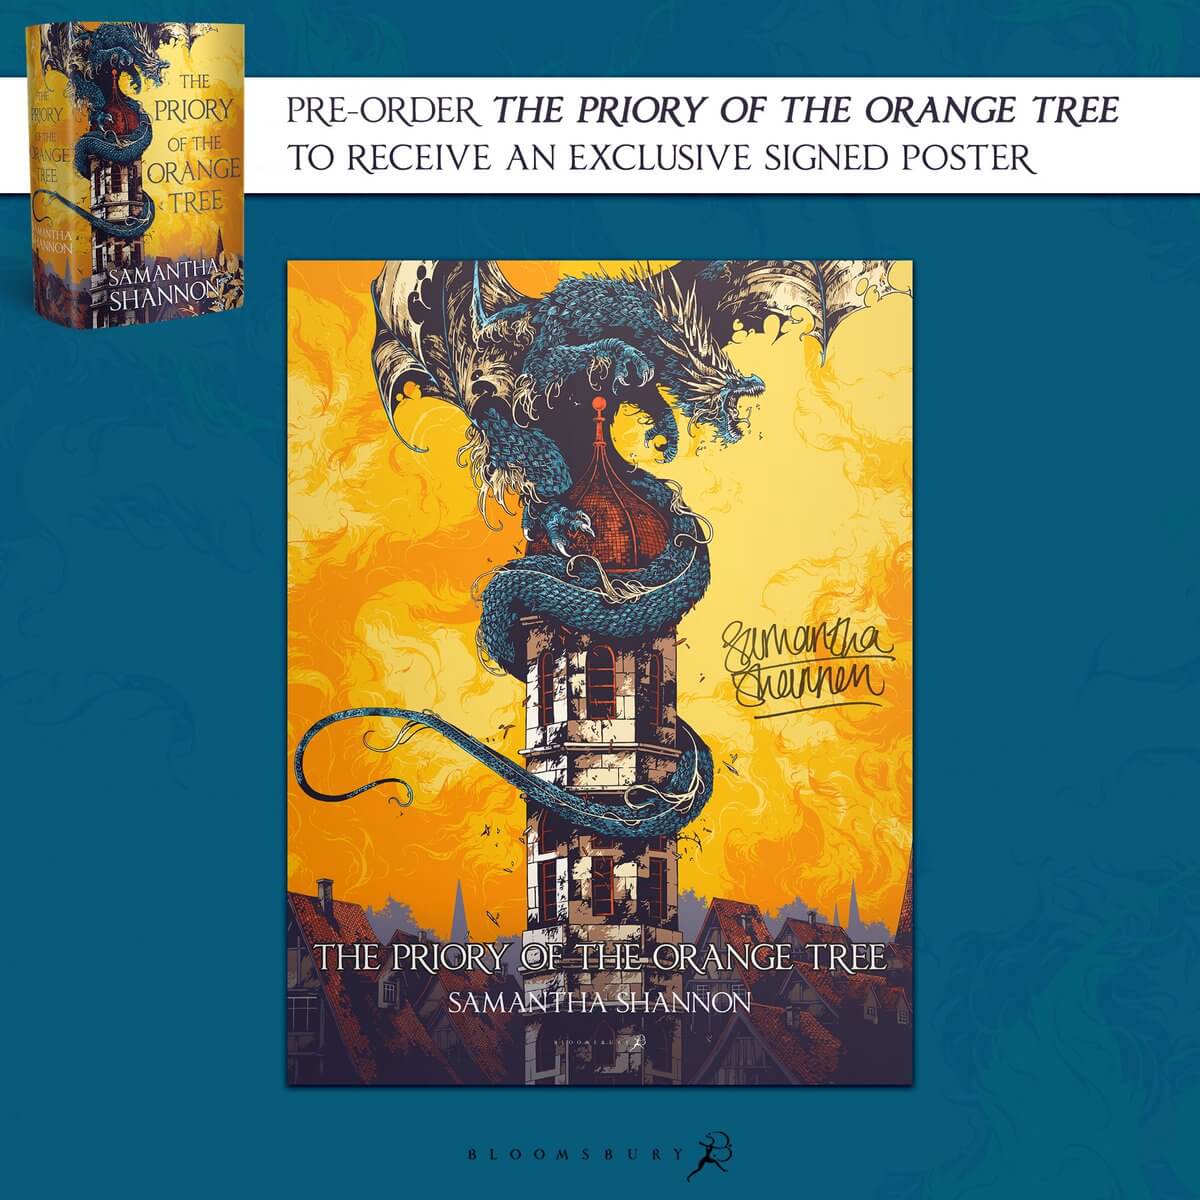 The Priory of the Orange Tree by Samantha Shannon